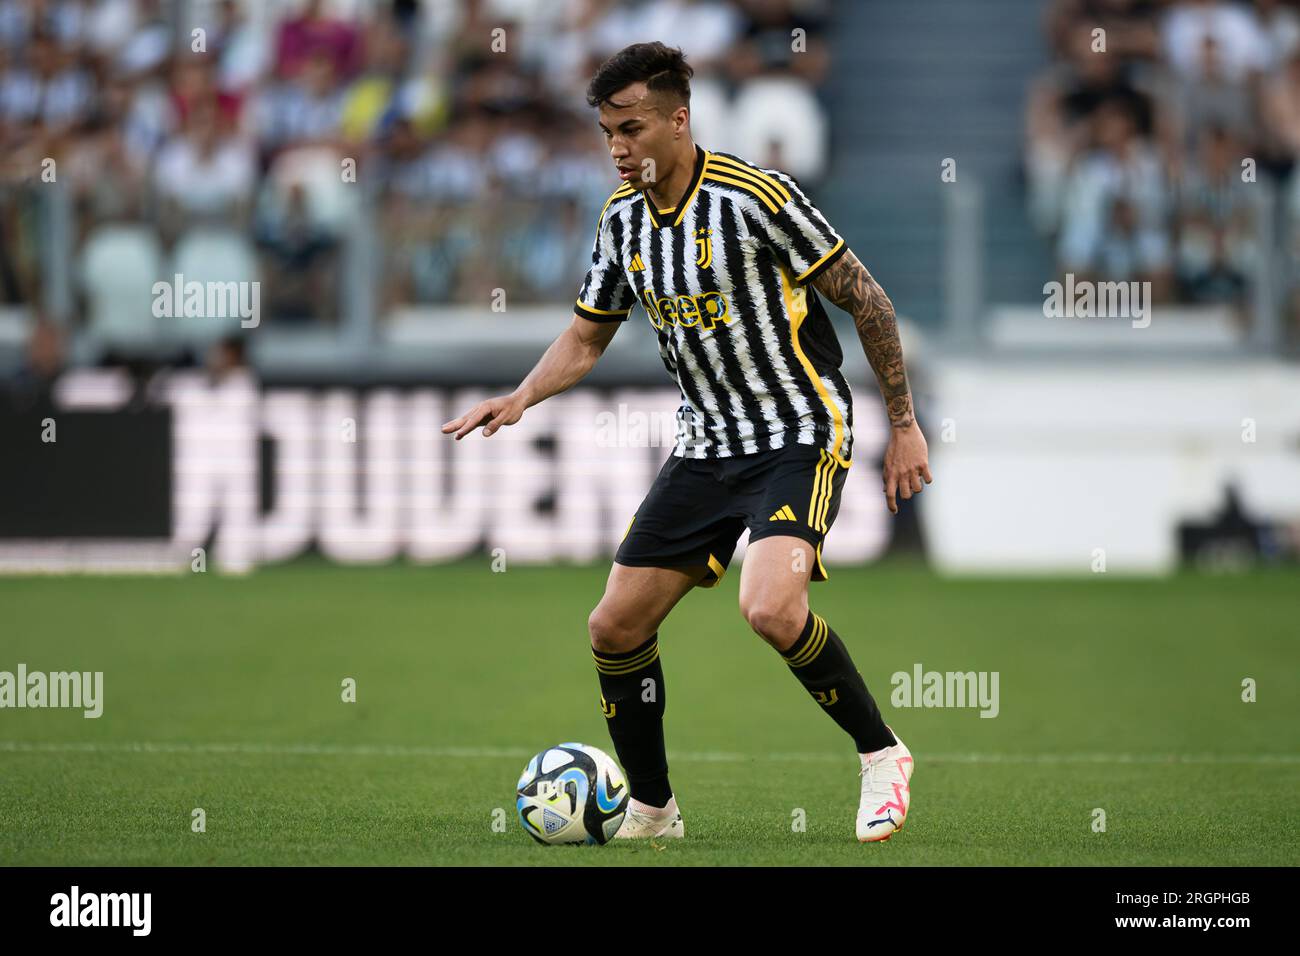 Kaio Jorge of Juventus FC in action during the friendly football match between Juventus FC and Juventus Next Gen. Stock Photo